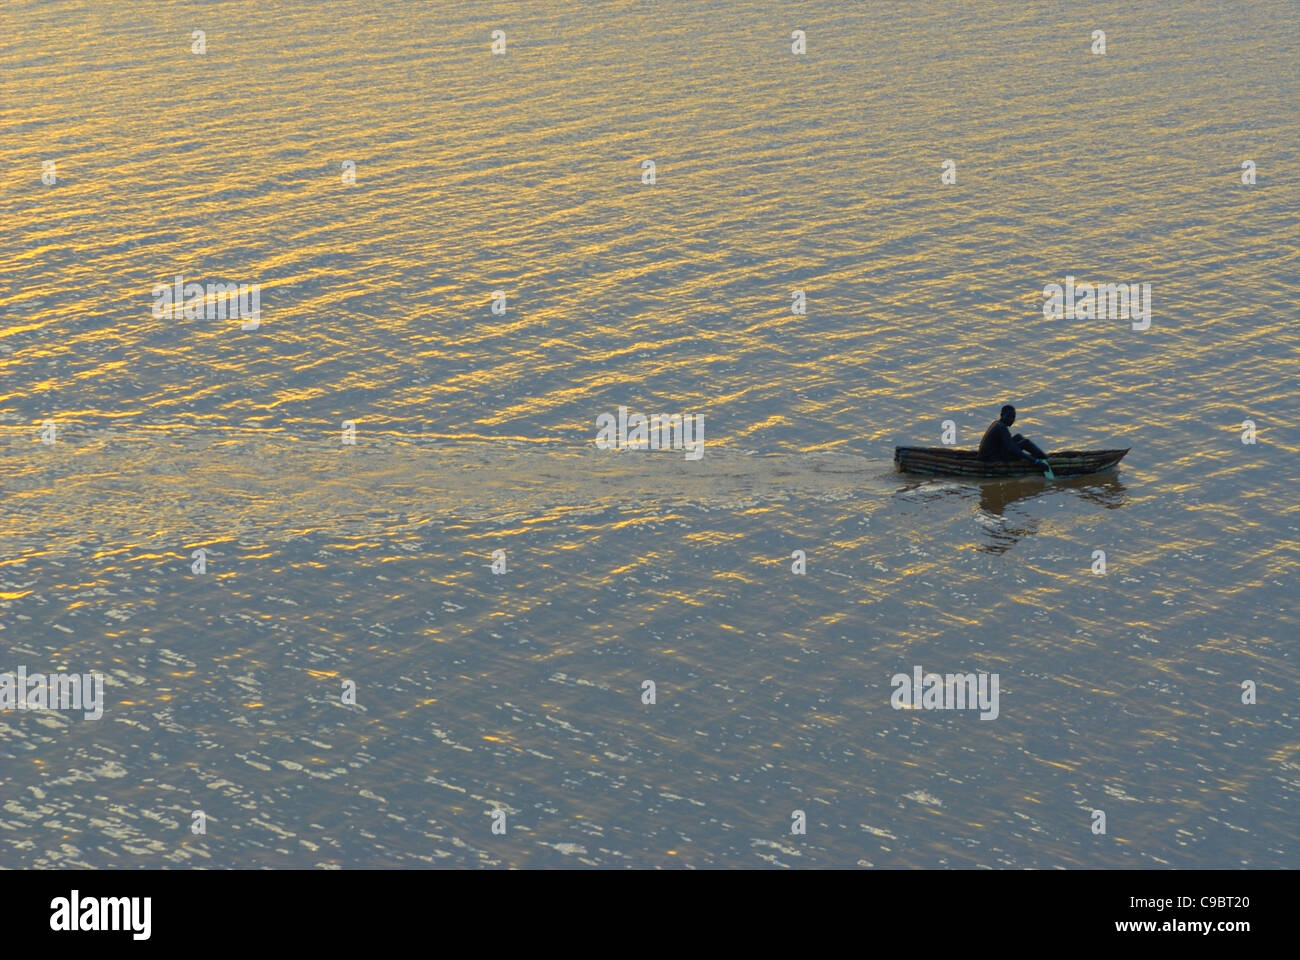 Njemps Fishman leaves early in the morning on his handmade reed boat to go fishing, Baringo, Kenya. Stock Photo